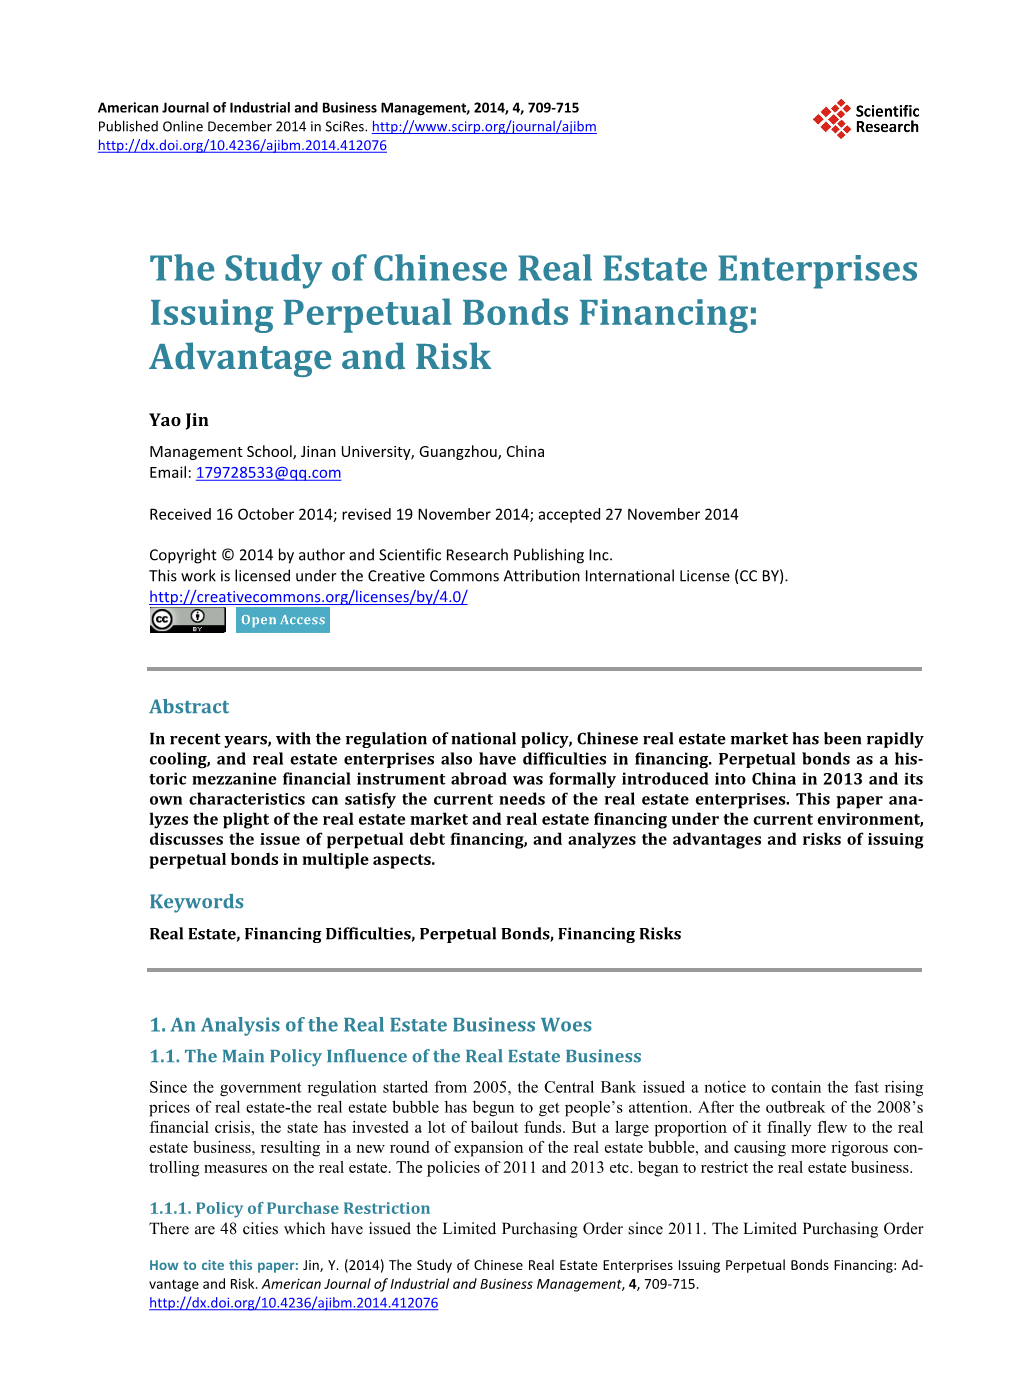 The Study of Chinese Real Estate Enterprises Issuing Perpetual Bonds Financing: Advantage and Risk